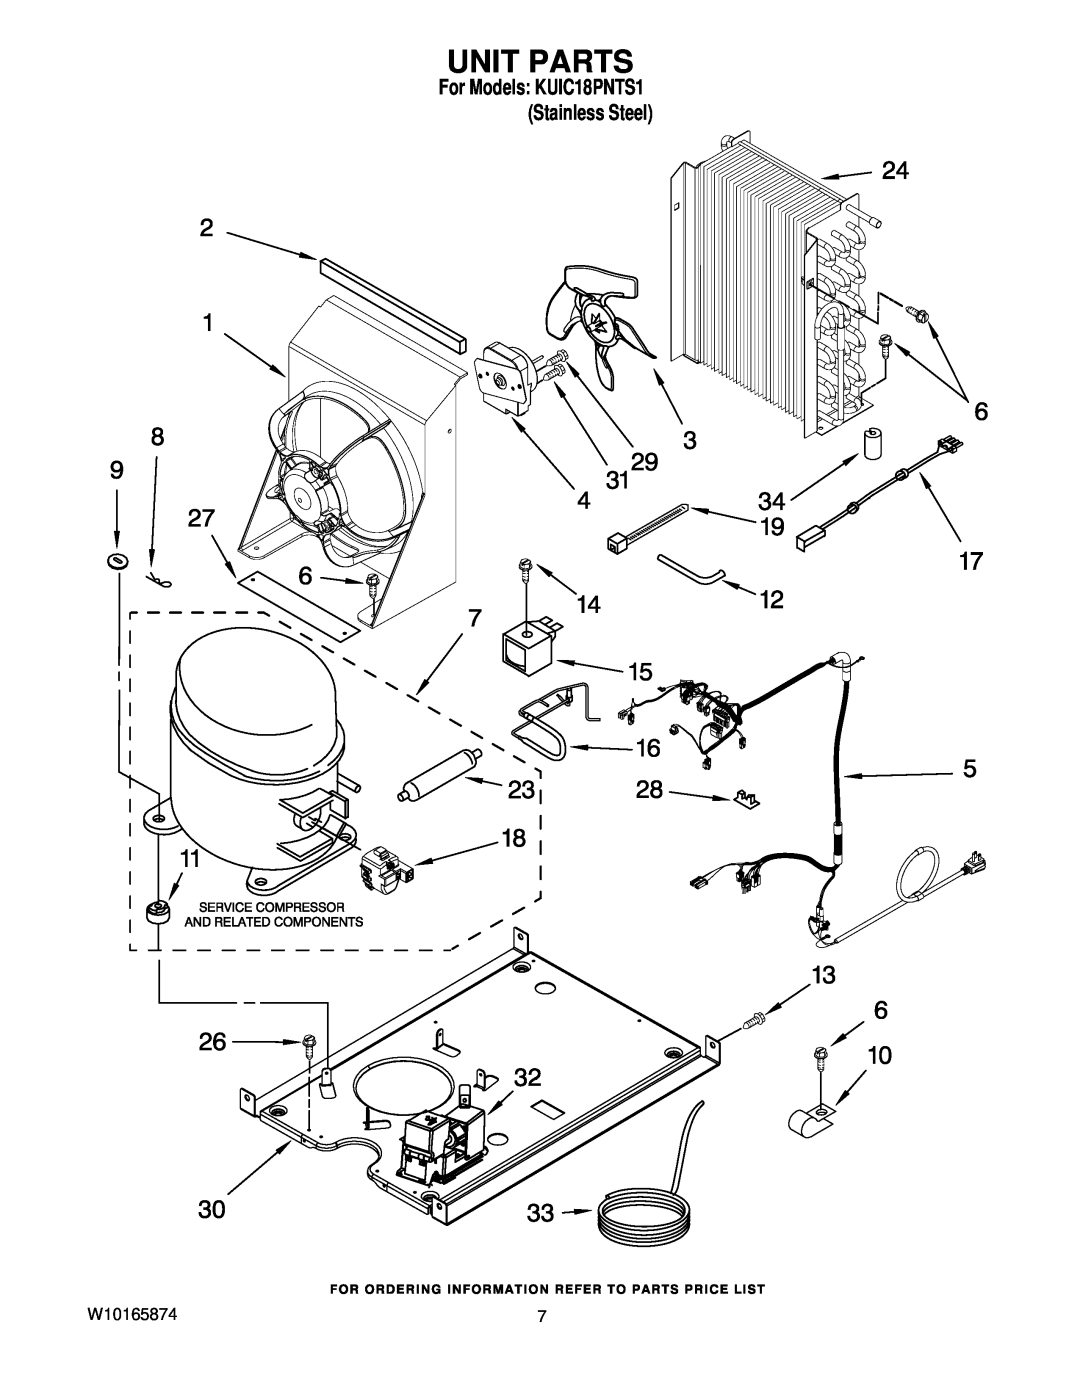 KitchenAid manual Unit Parts, W10165874, For Models KUIC18PNTS1 Stainless Steel 